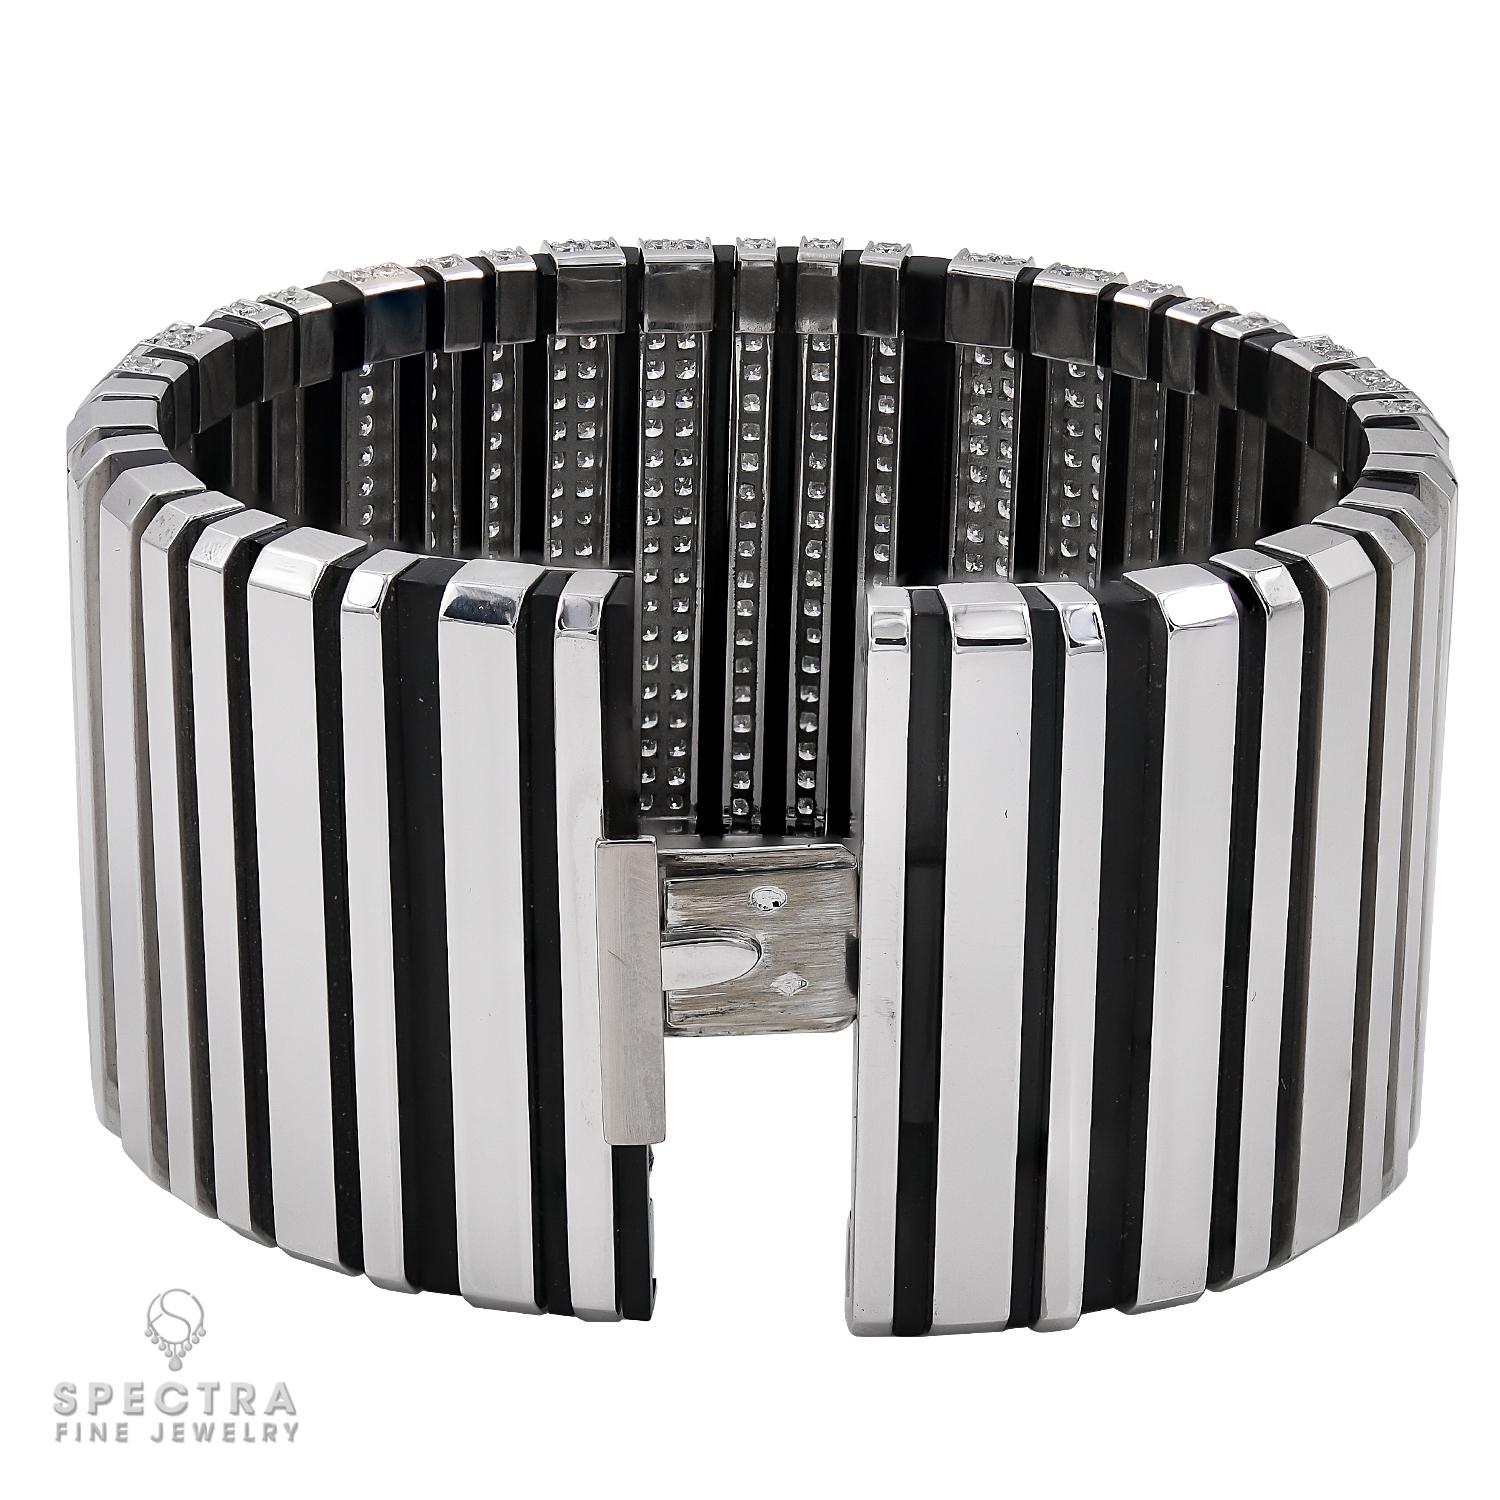 This spectacularly chic Cartier Code Barre Pierre Brun Bracelet, made in France in the 20th century, circa 1990s, features the sleek geometry, crisp lines, and high contrast color combinations that have continued to fascinate the world-renowned